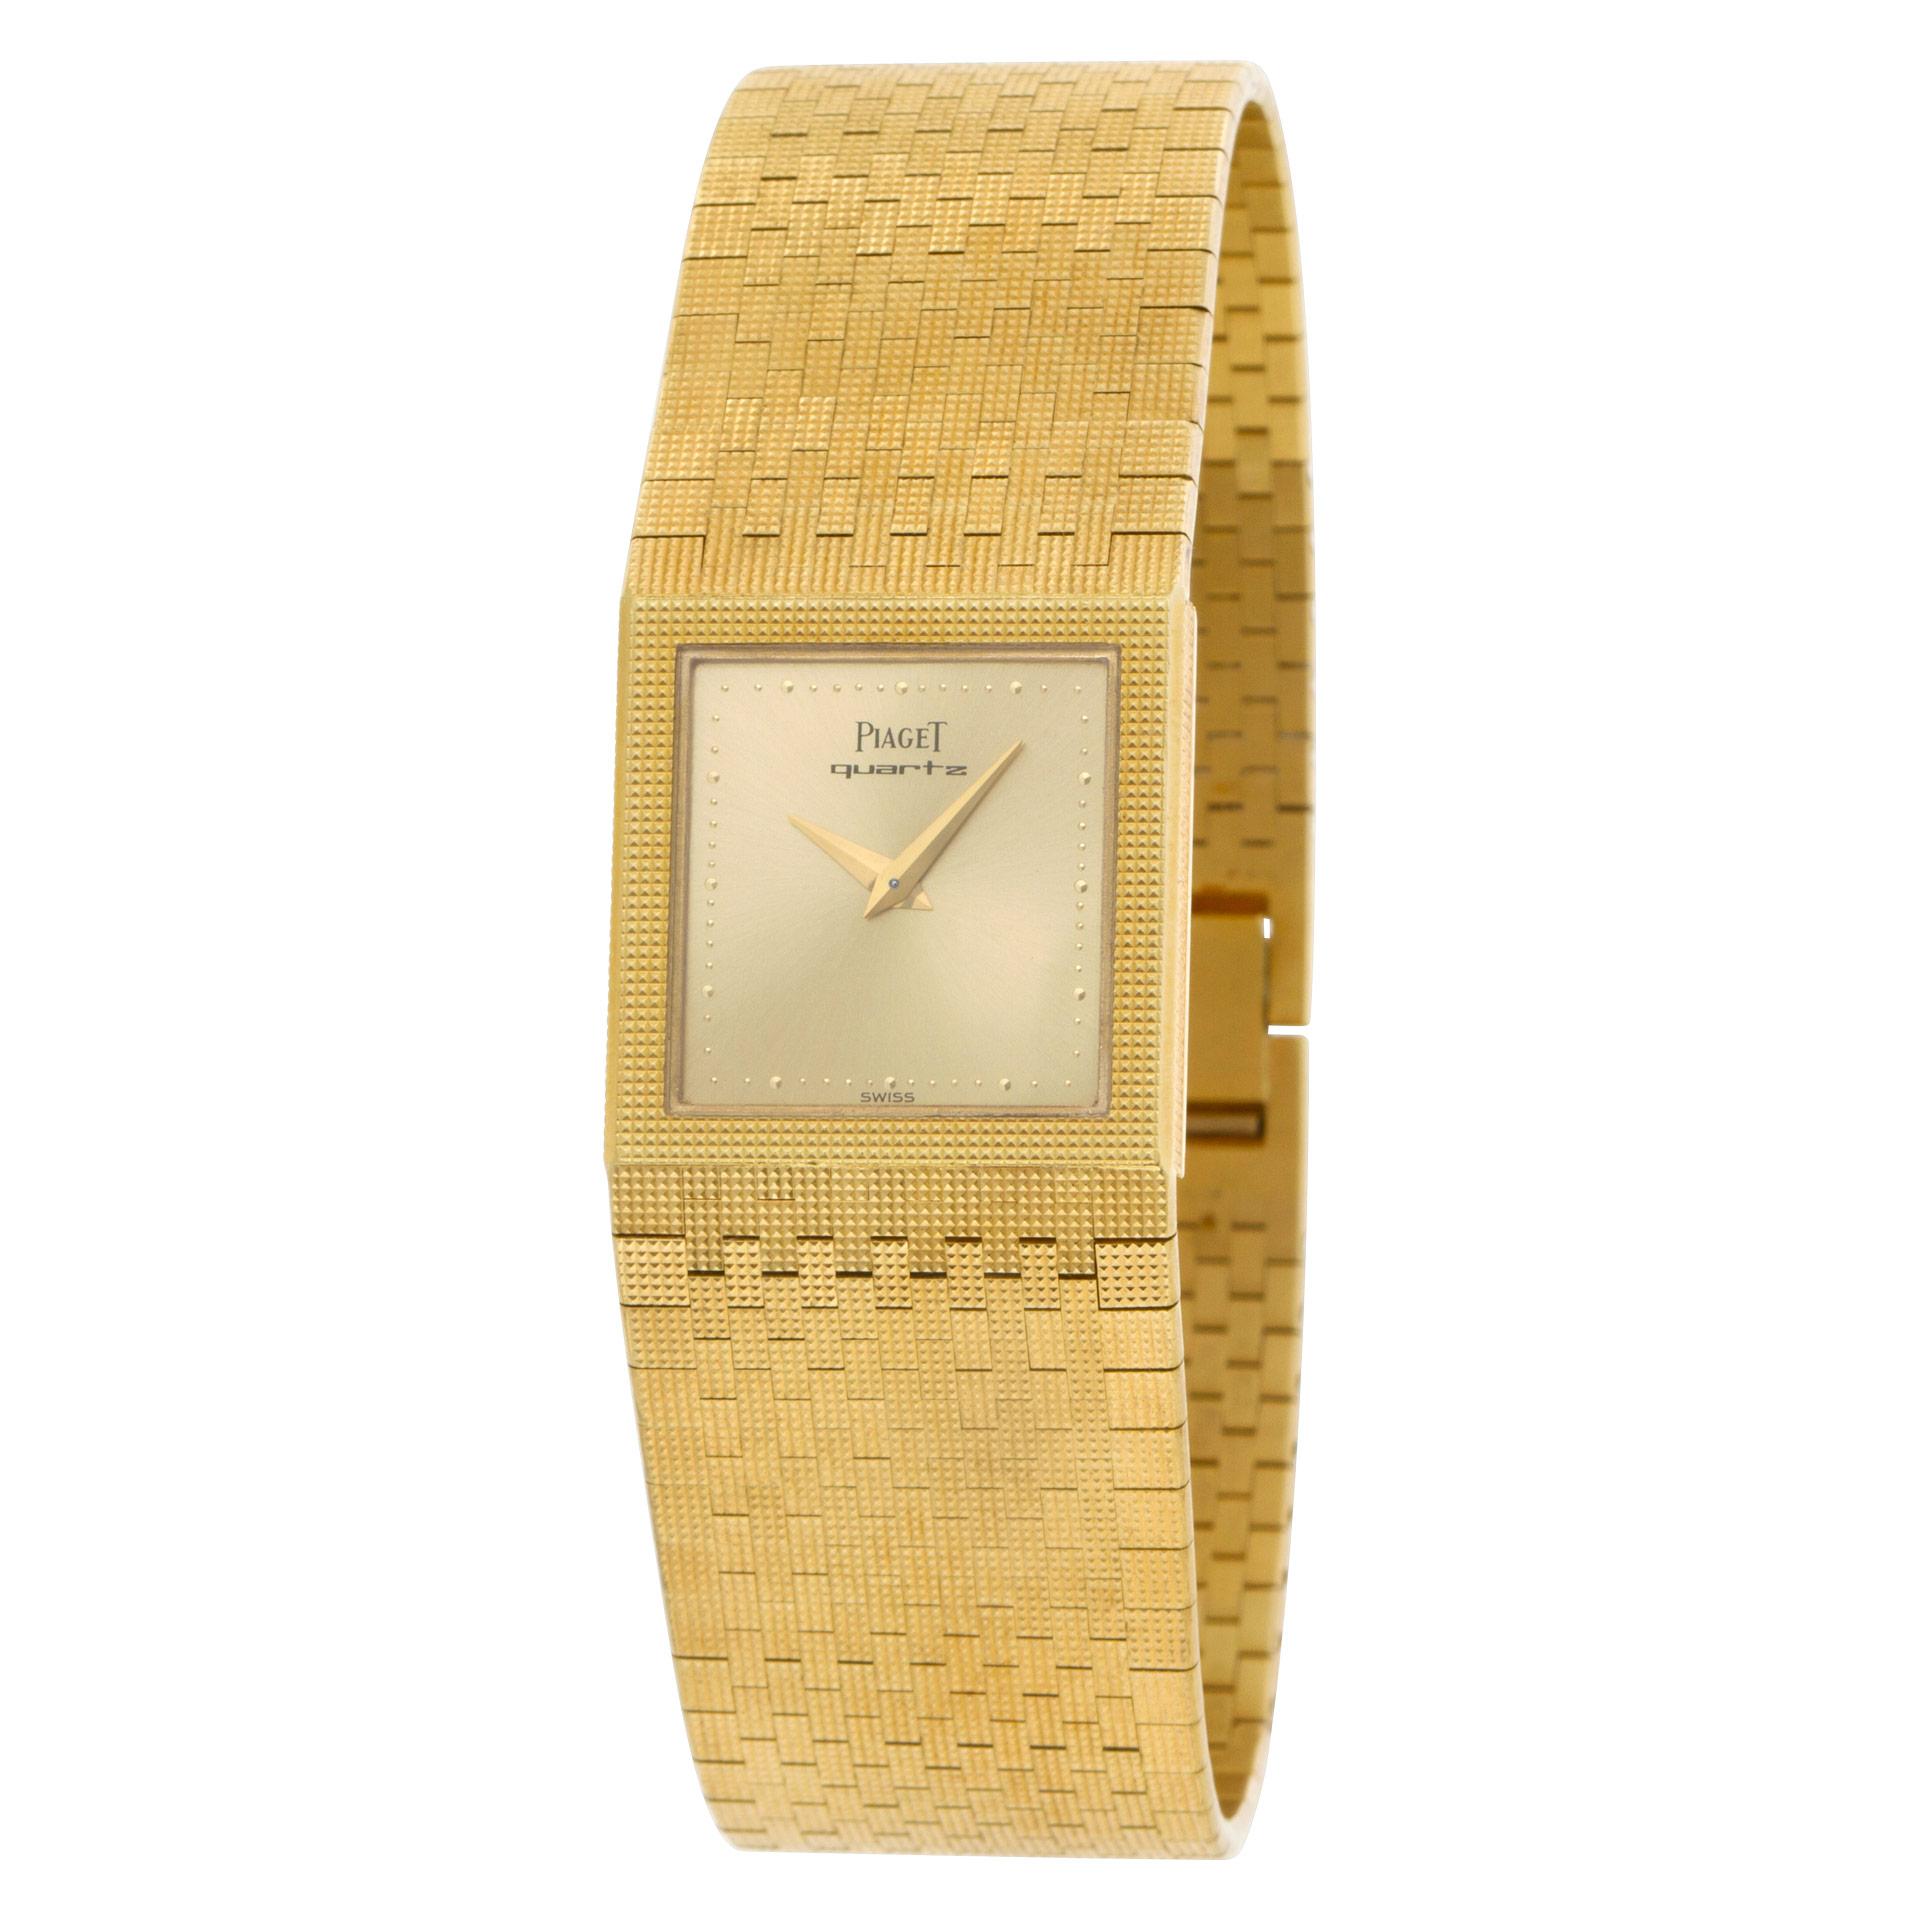 Piaget Polo in 18k. Quartz. 23 mm case size. With box and papers. Fits 7.75 inches wrist. Ref 368727. Circa 1990s. Fine Pre-owned Piaget Watch.  Certified preowned Dress Piaget Polo 368727 watch is made out of yellow gold on a 18k bracelet with a